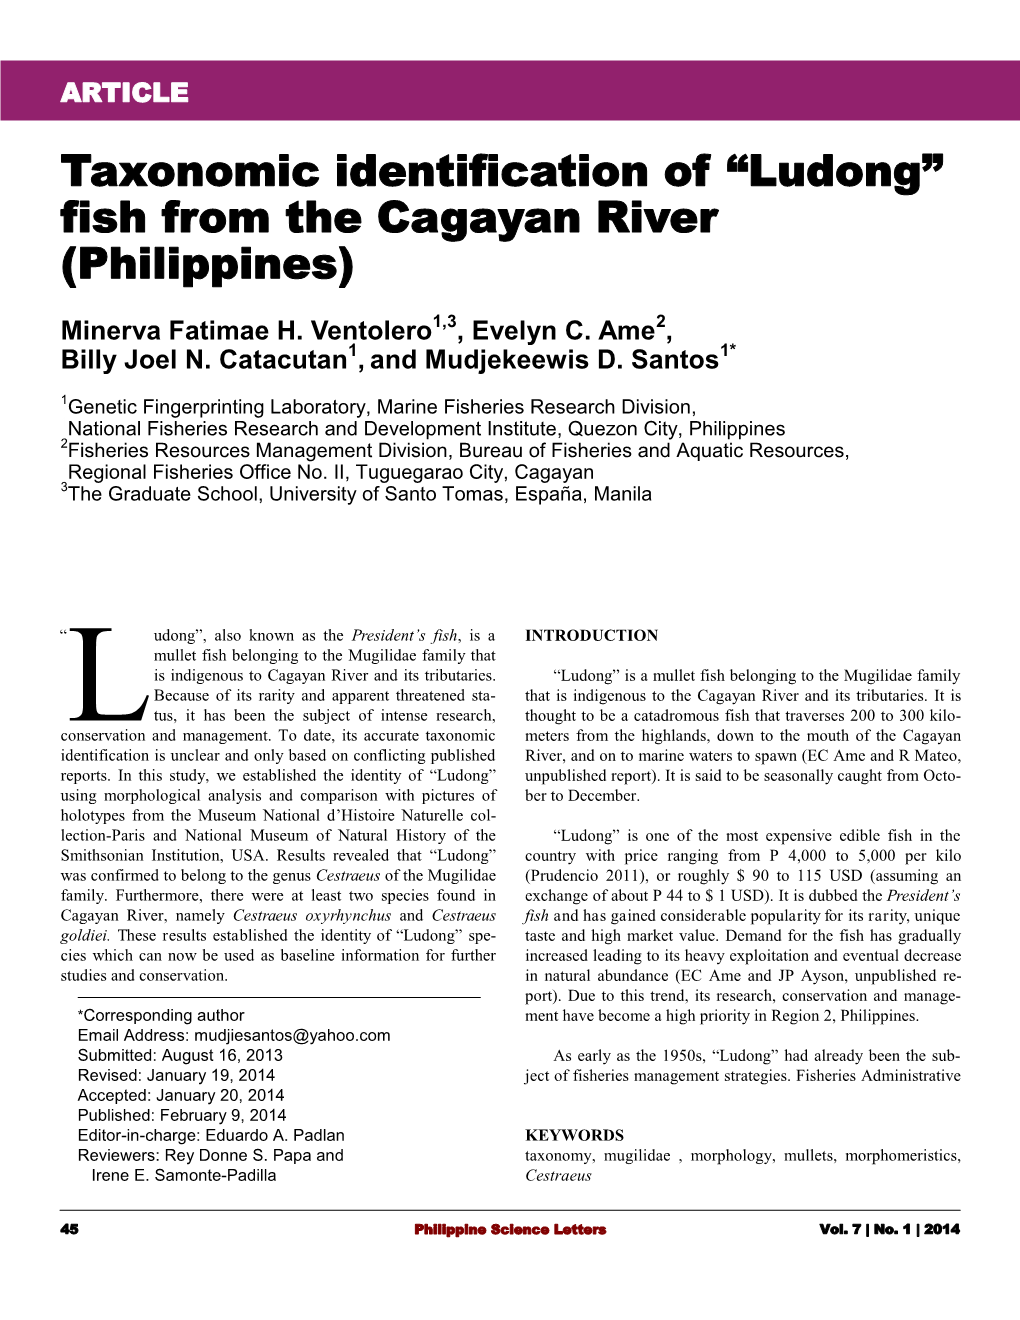 Taxonomic Identification of “Ludong” Fish from the Cagayan River (Philippines)